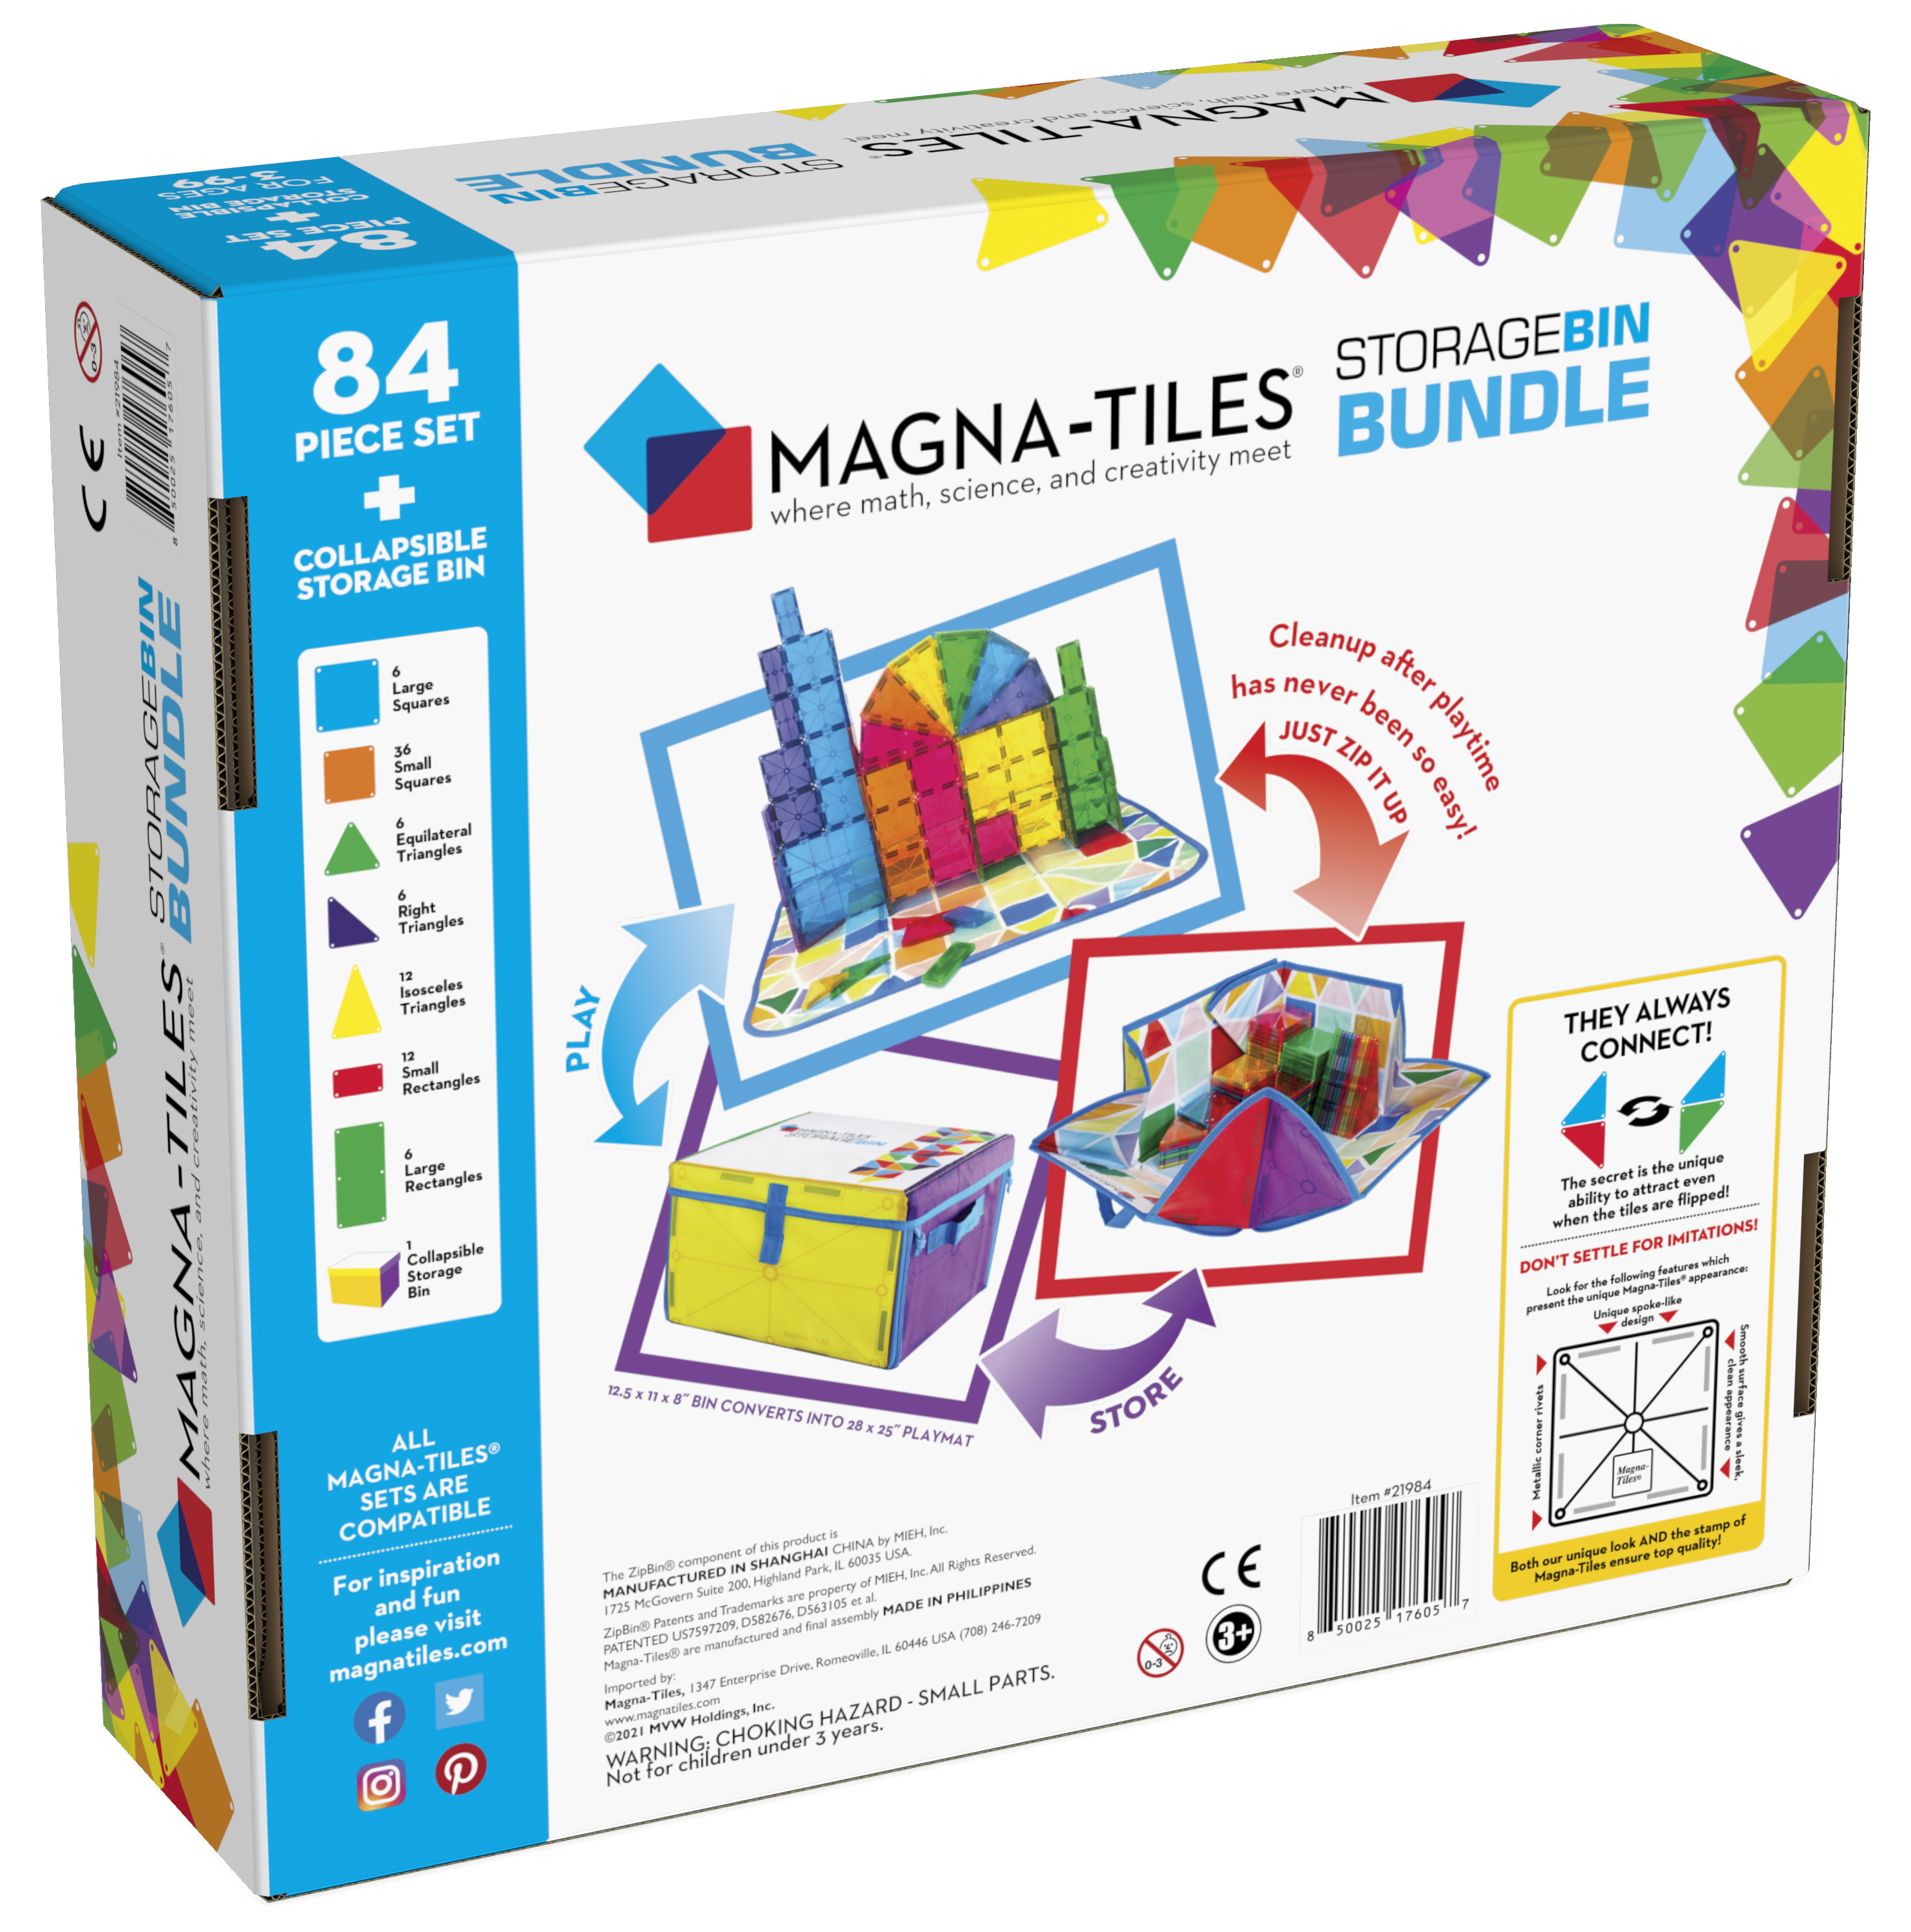 Magna-Tiles Storage Bin & Interactive Play-Mat, Collapsible Storage Bin  With Handles for Playroom, Closet, Bedroom, Home Organization and  Classroom